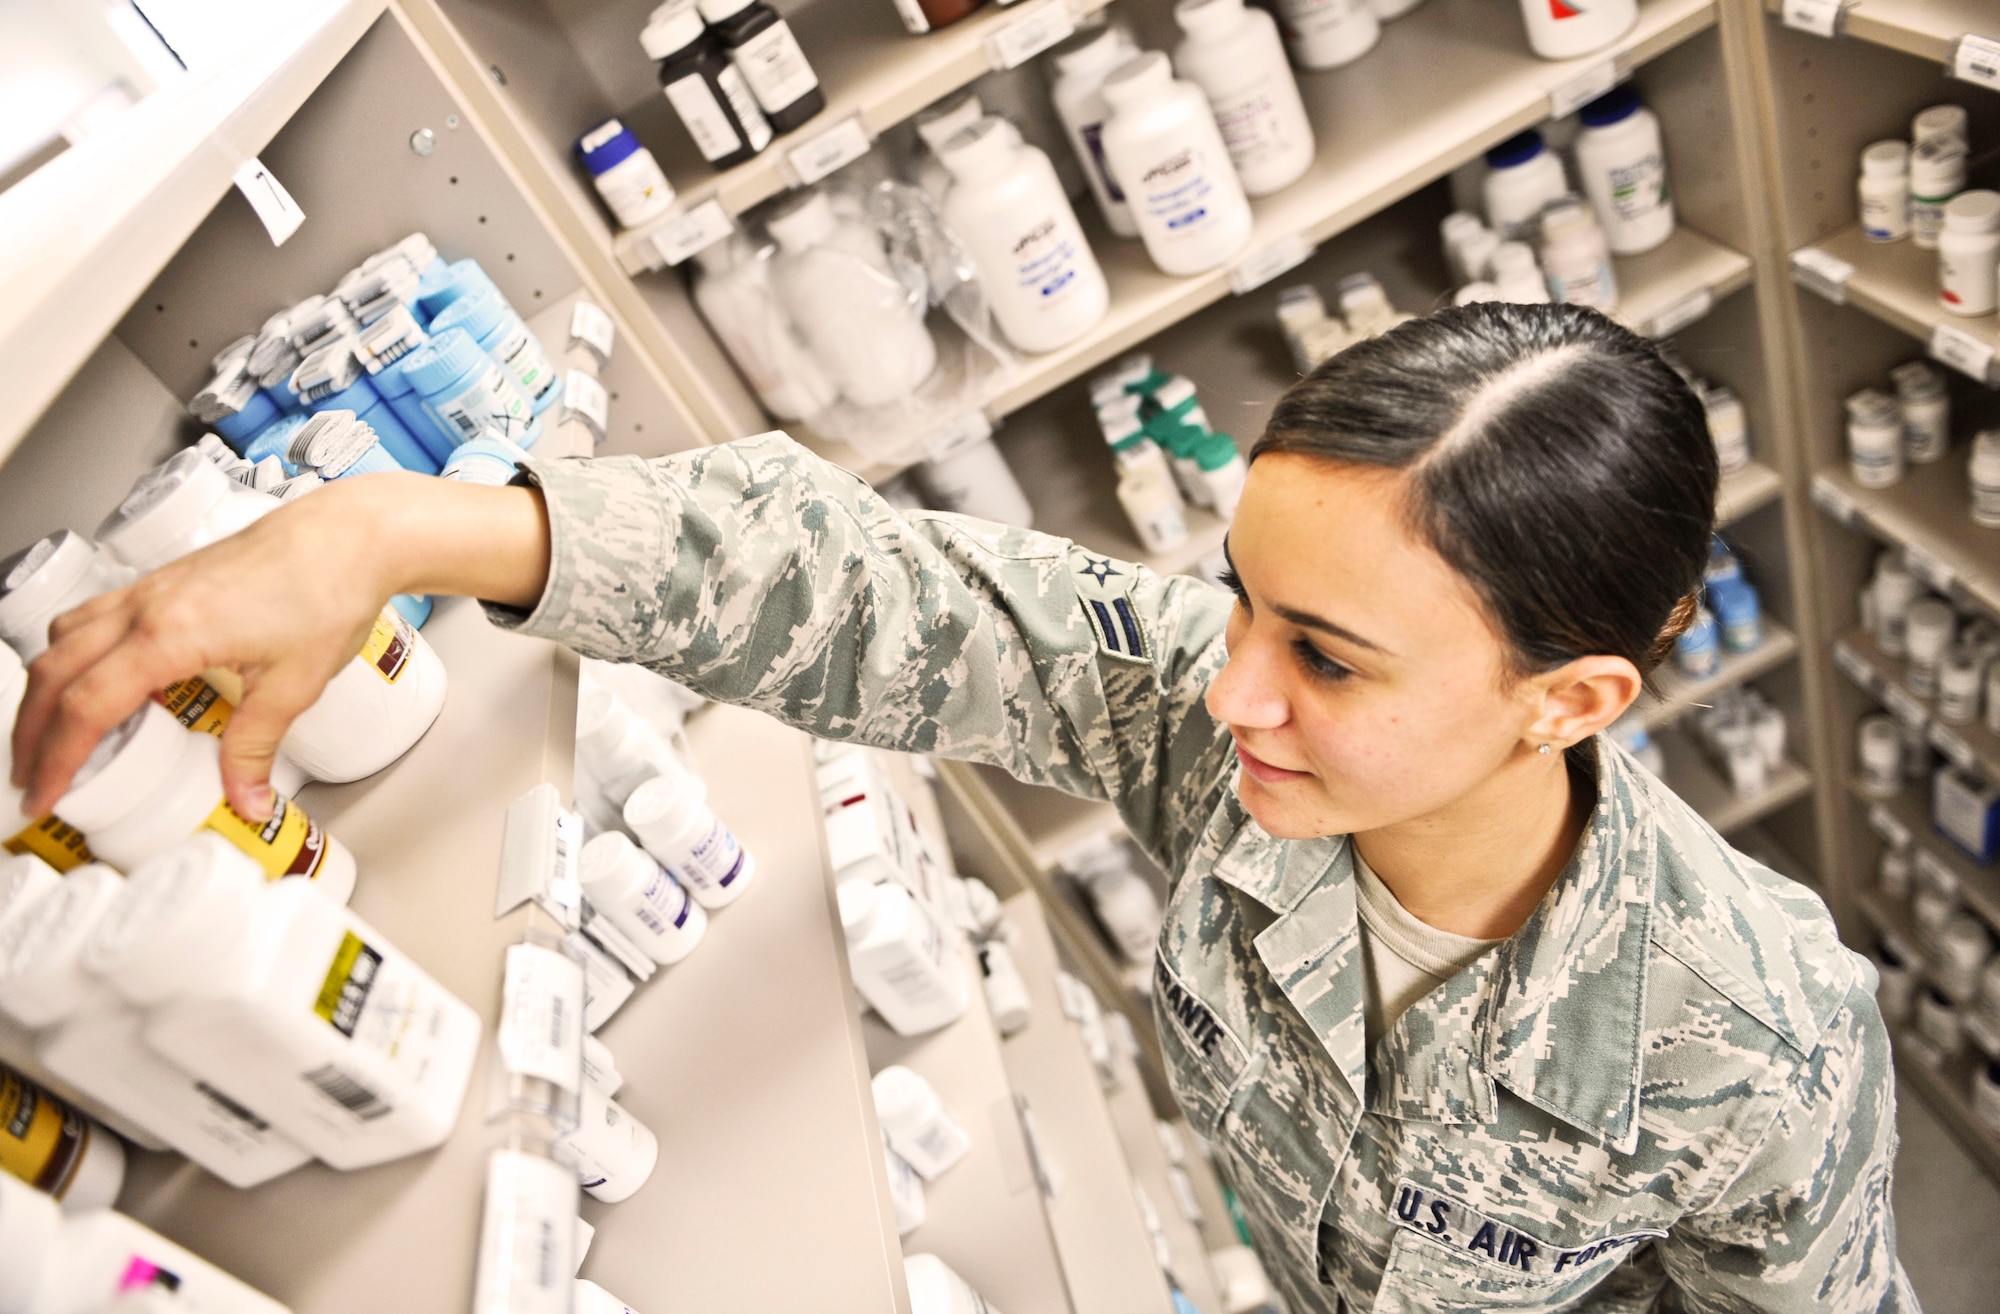 U.S. Air Force Airman 1st Class Julianna Ferrante, 7th Medical Support Squadron pharmacy technician, reaches for a prescription at the Dyess pharmacy, Oct. 22, 2013, at Dyess Air Force Base, Texas. The Self Initiated Care Kit is a new program offered by the MDG that allows Airmen, their dependents and retirees already receiving pharmaceutical benefits under Tricare to access free over-the-counter medication without requiring an appointment at the clinic. To access the over-the-counter medication, individuals fill out a form located in the pharmacy or online (http://www.dyess.af.mil/library/factsheets/factsheet.asp?id=22835), and select the medication they need. (U.S. Air Force photo by Airman 1st Class Kedesha Pennant/Released)